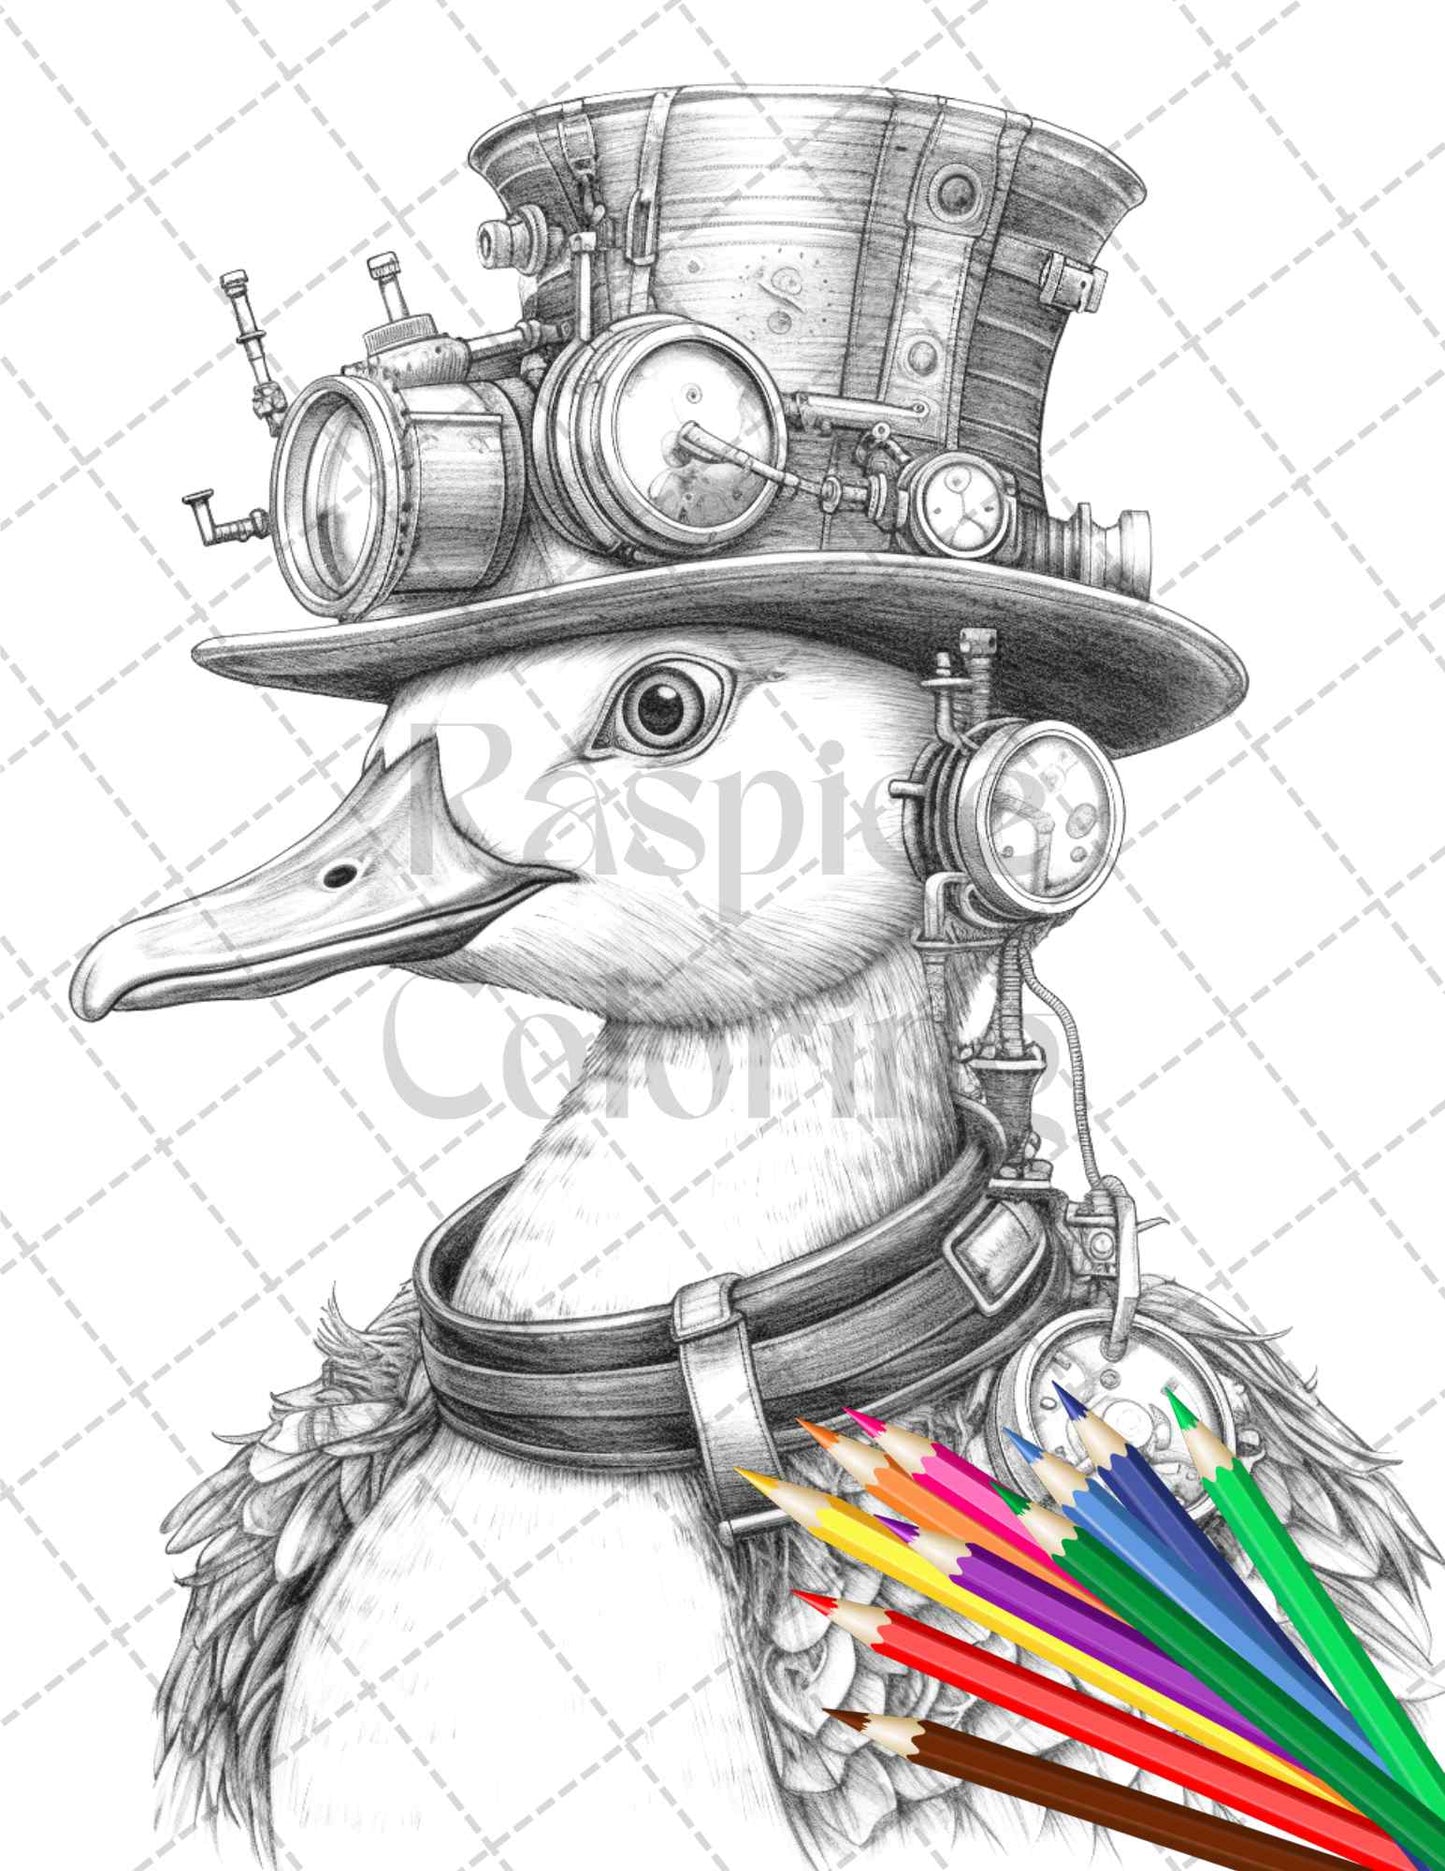 45 Steampunk Animals Grayscale Coloring Pages Printable for Adults Vol. 2, PDF File Instant Download - raspiee